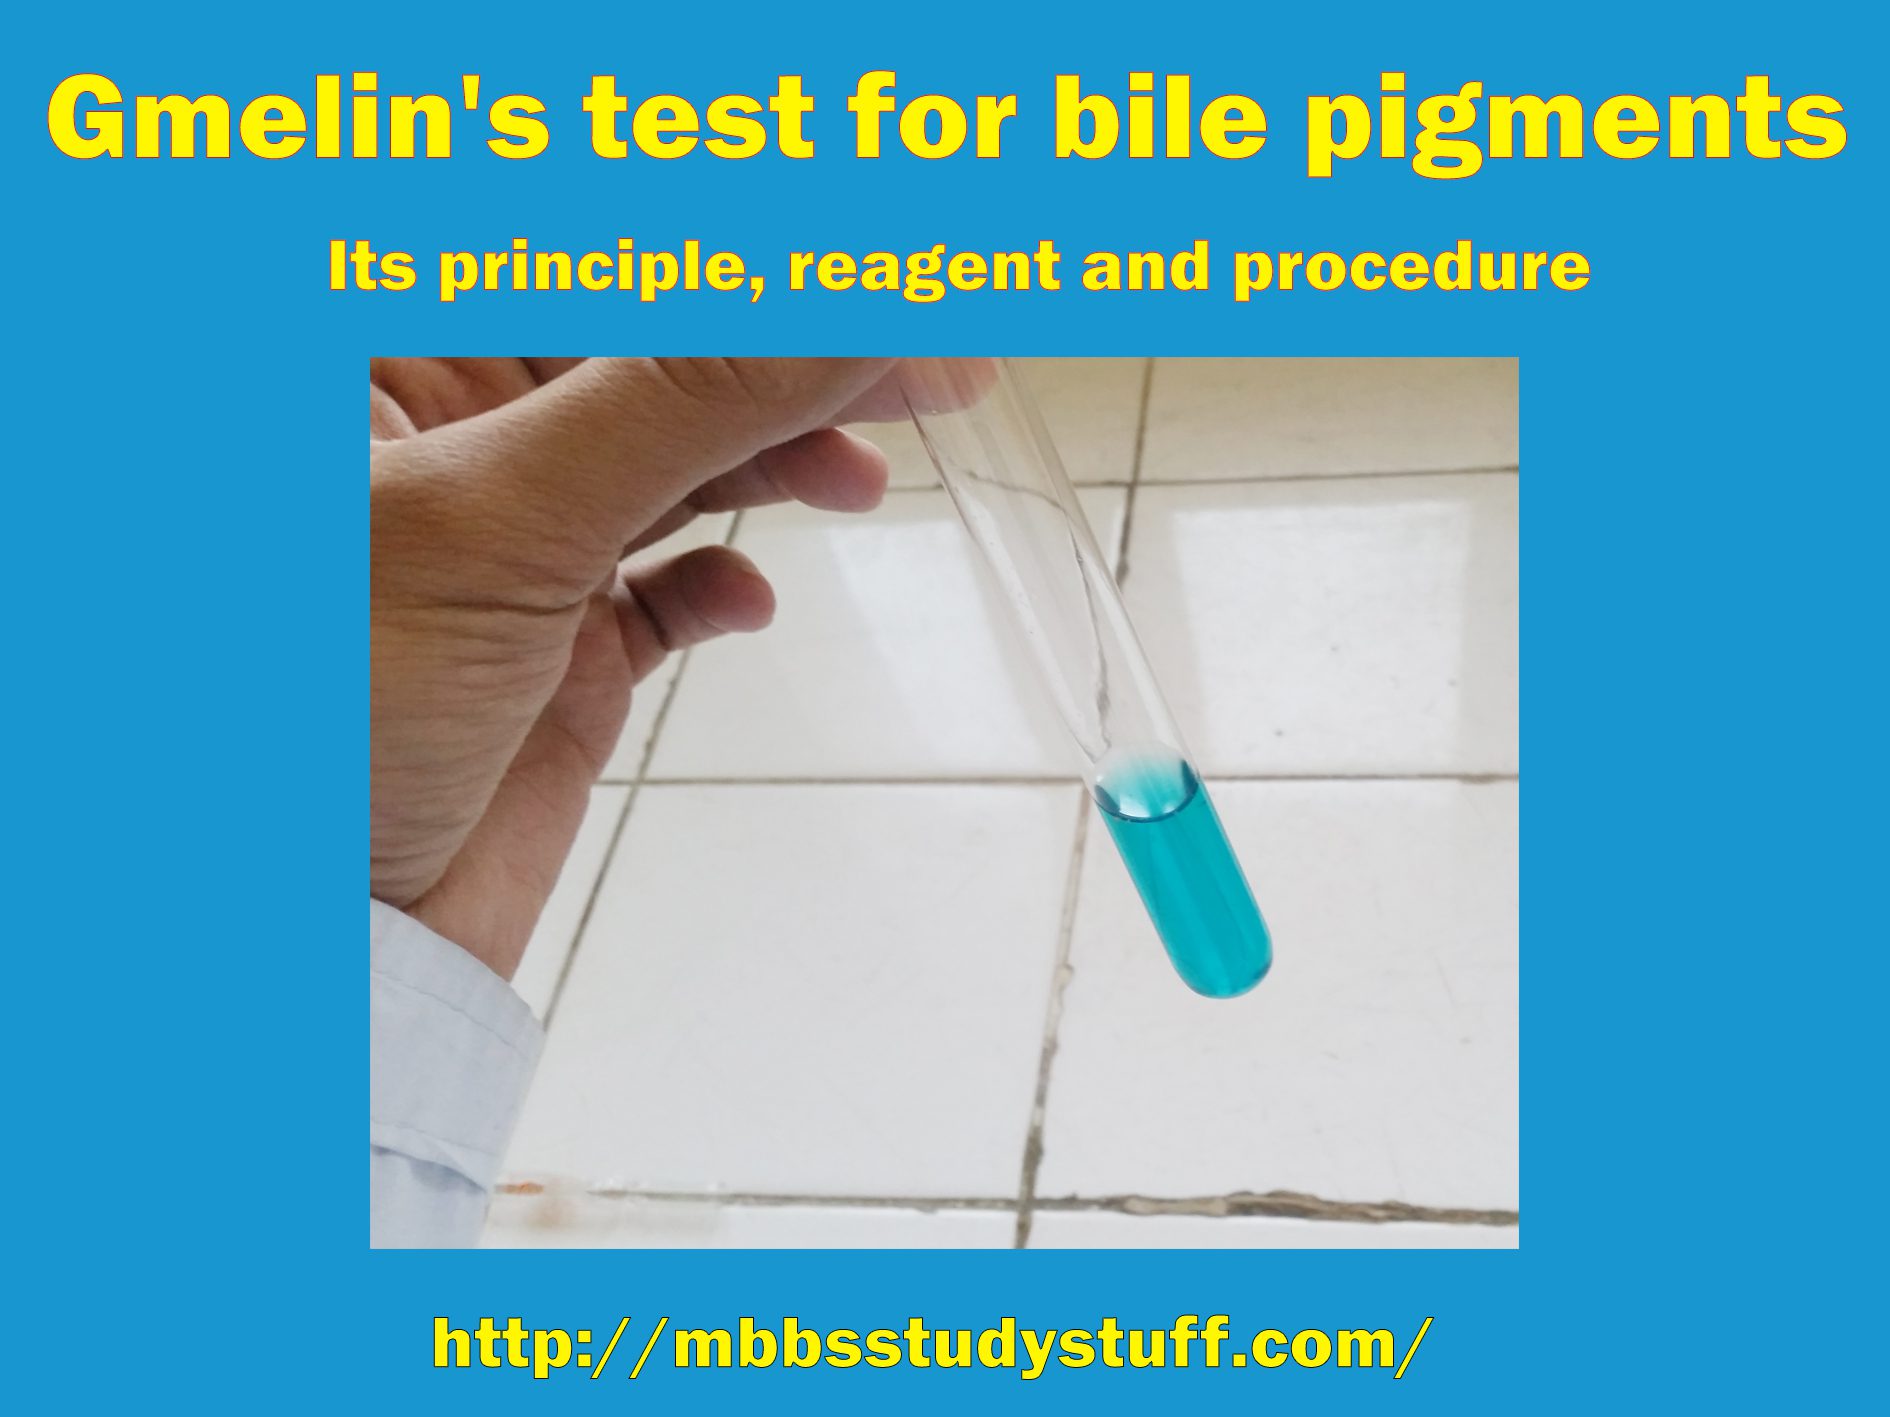 Gmelin's test for bile pigments - Its principle, reagent and procedure